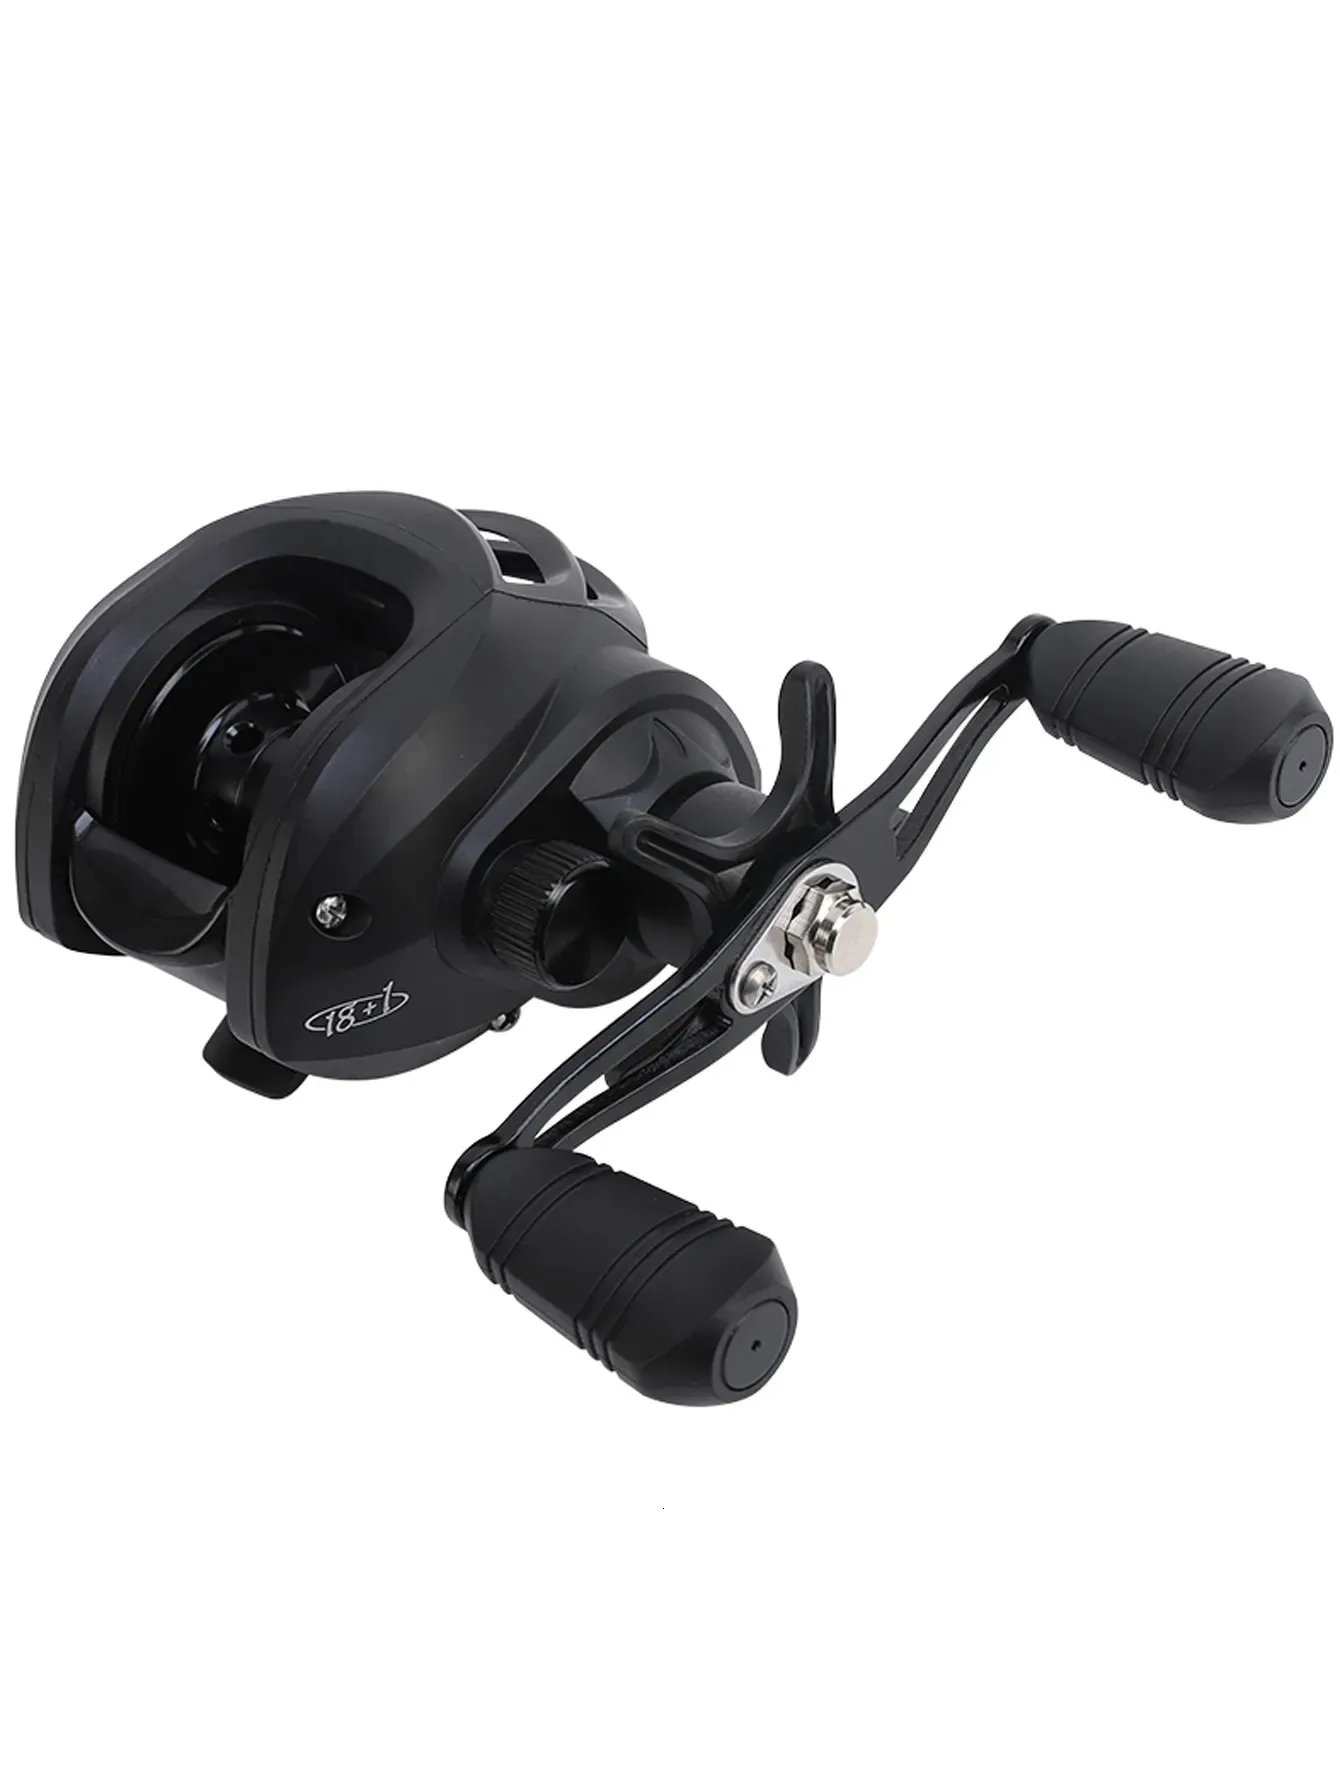 Ultralight Fly Fishing Reel With High Speed 8.1/1 Gear Ratio And Magnetic  Brake System For Freshwater Baitcasting Left/Right Hand Model 231115 From  Bian06, $9.54